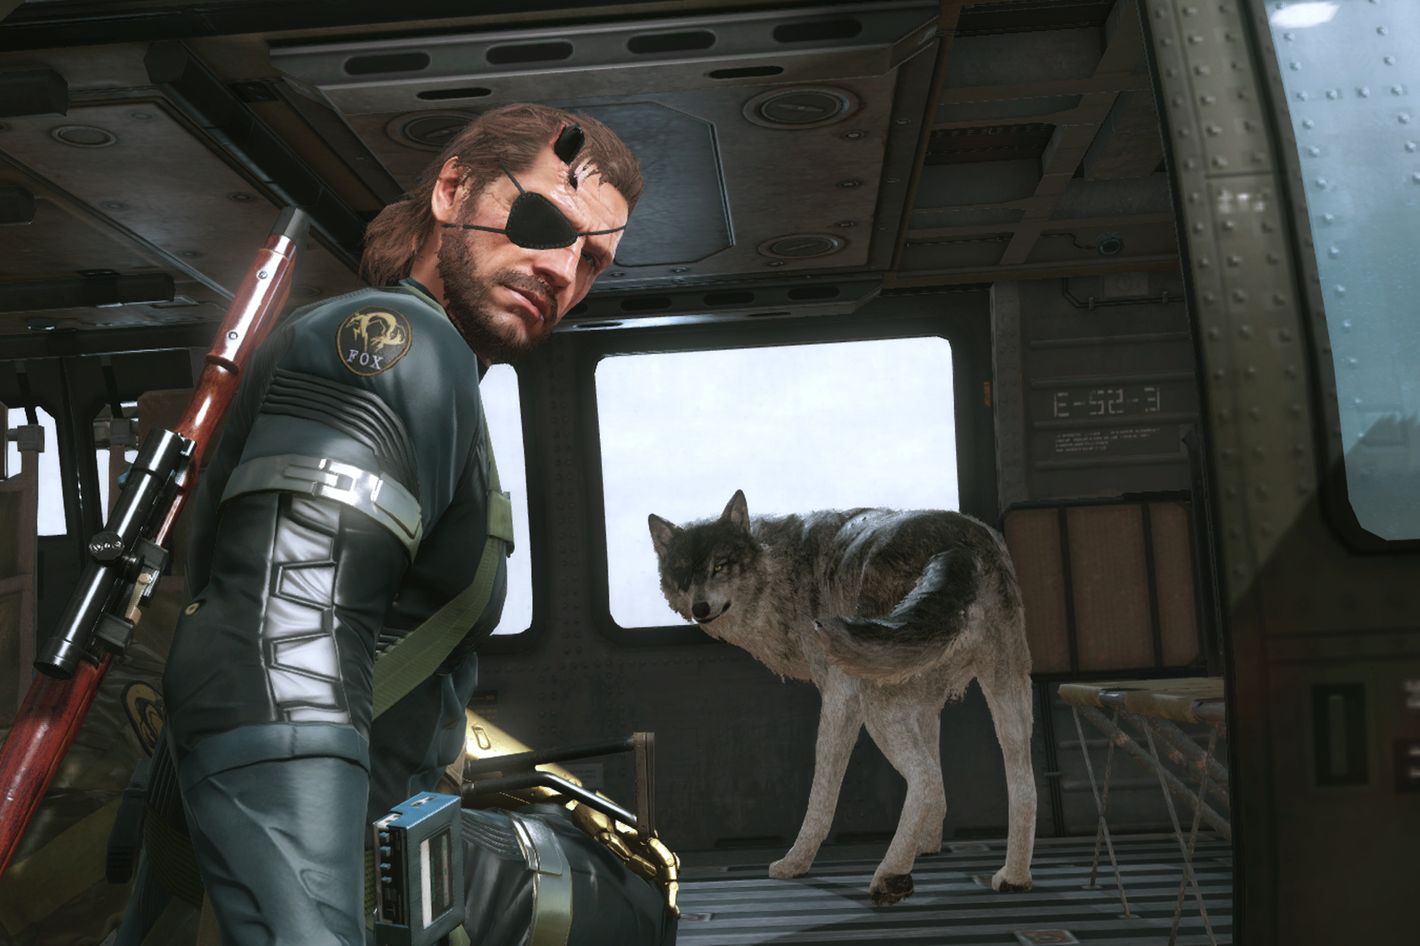 Hideo Kojima's name removed from Metal Gear Solid 5 branding